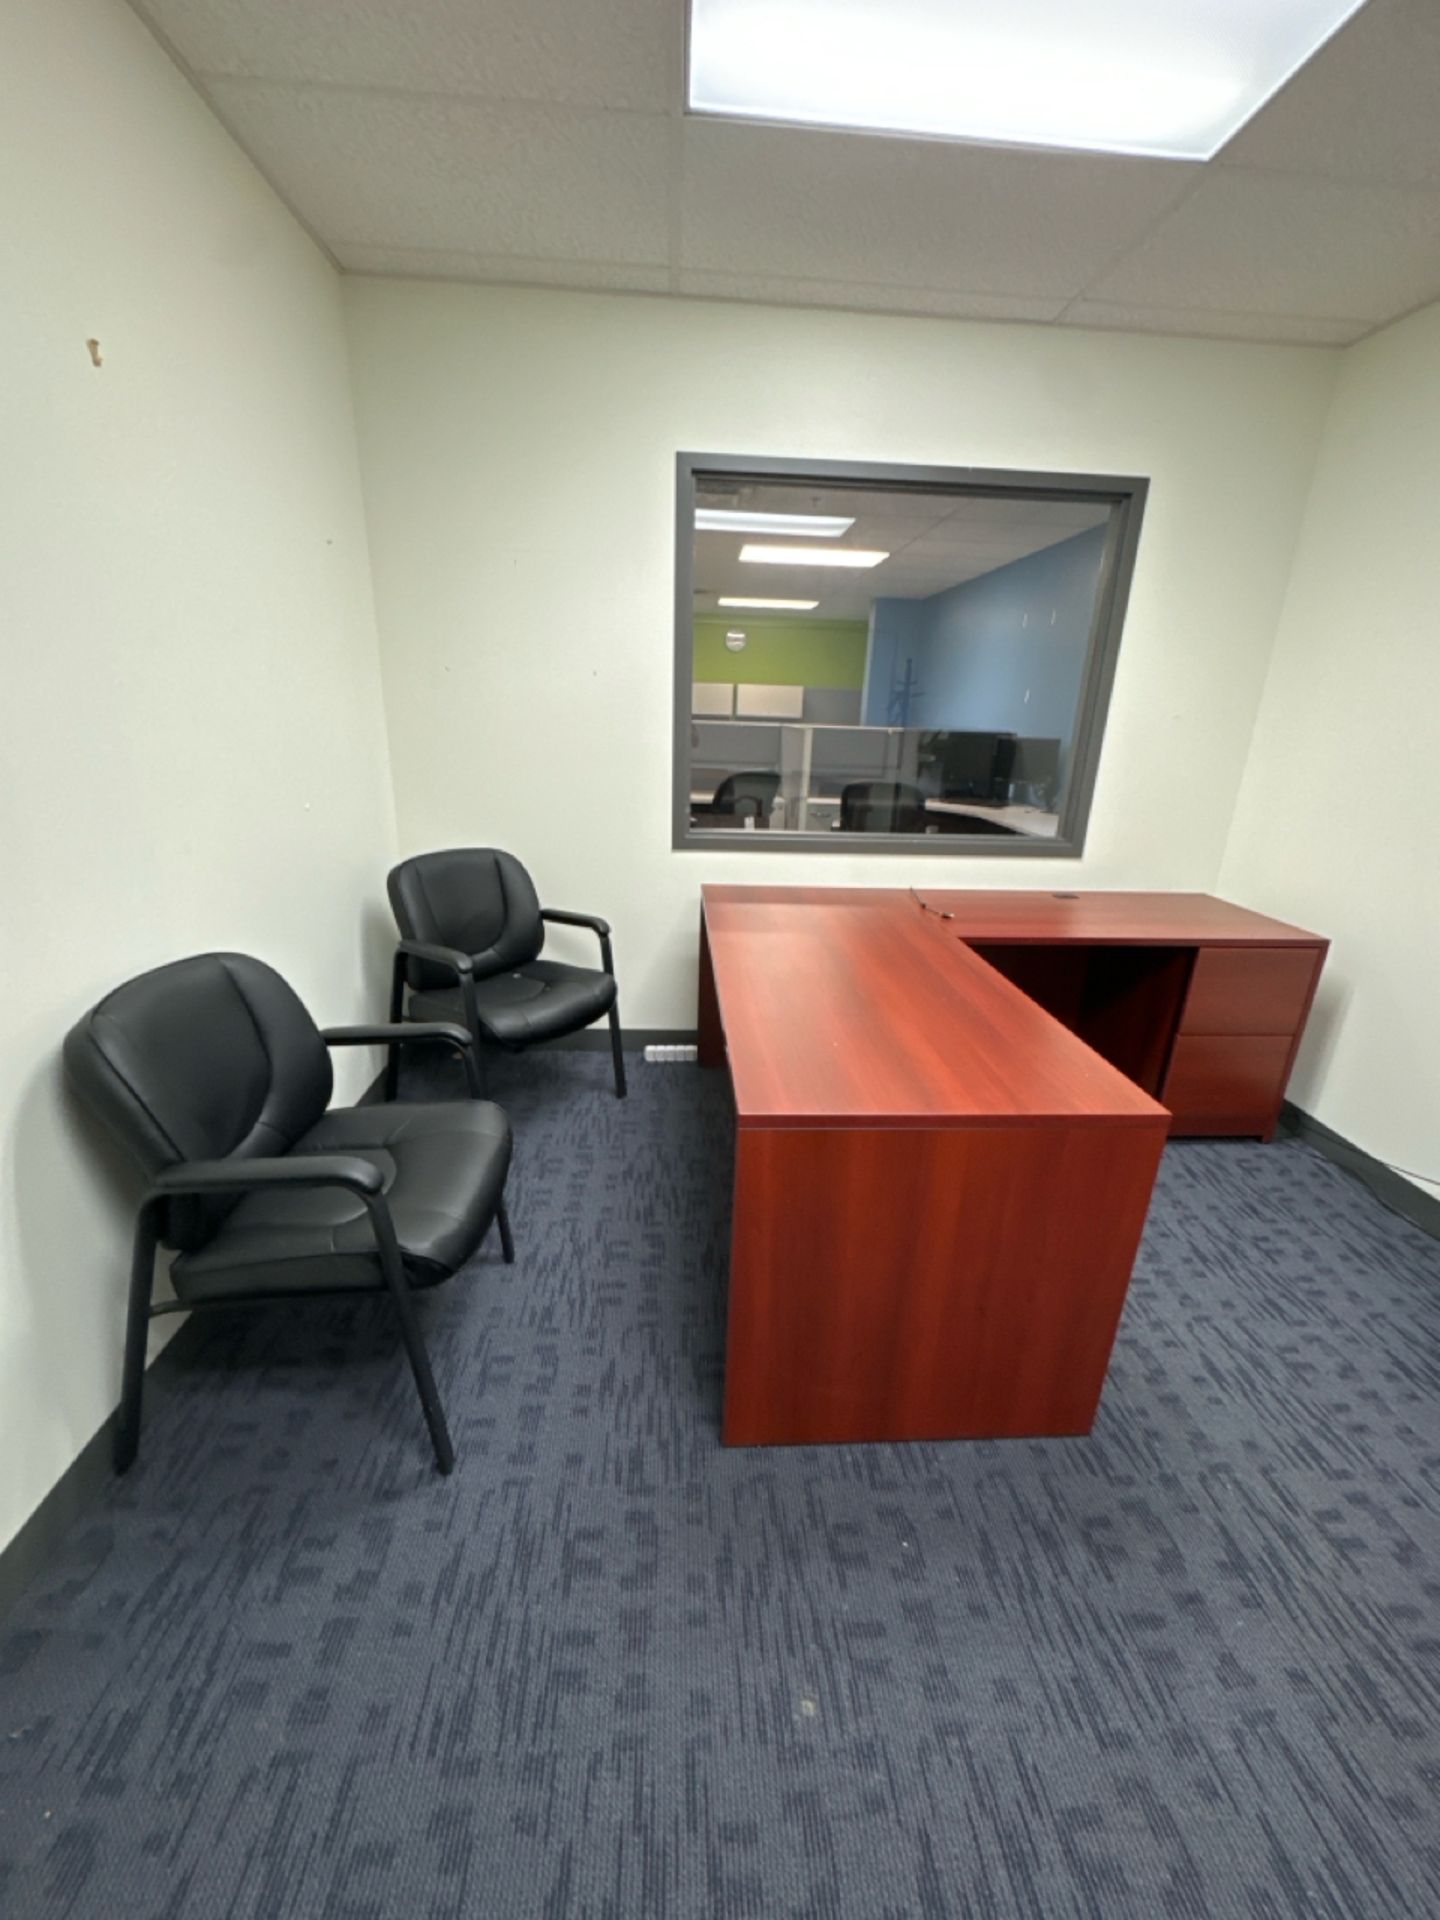 Office Furniture in Left Offices